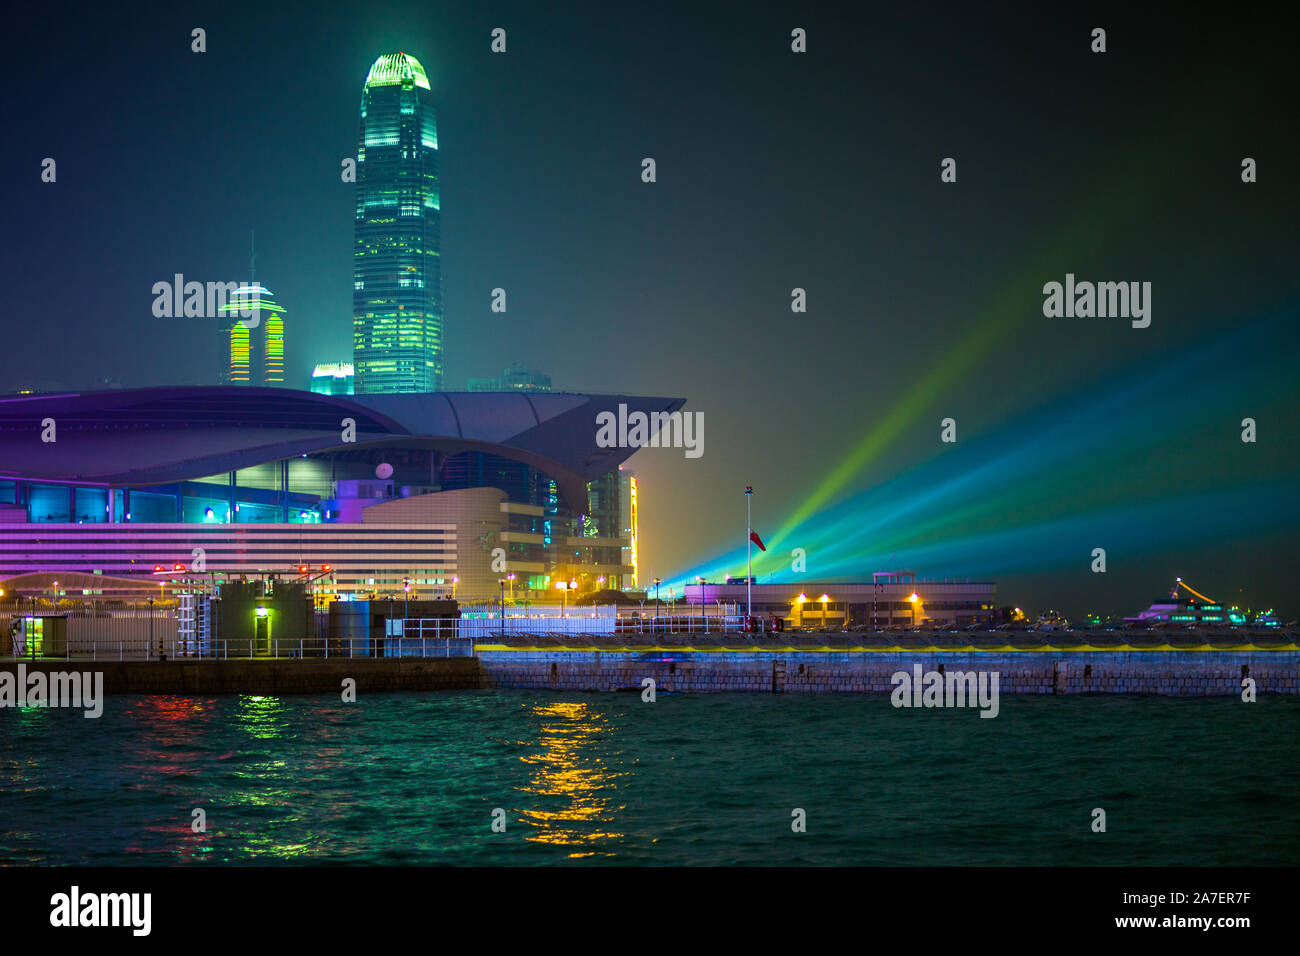 The Hong Kong Convention Center along Hong Kong harbour with celebratory searchlights prior to the New Years fireworks. Stock Photo